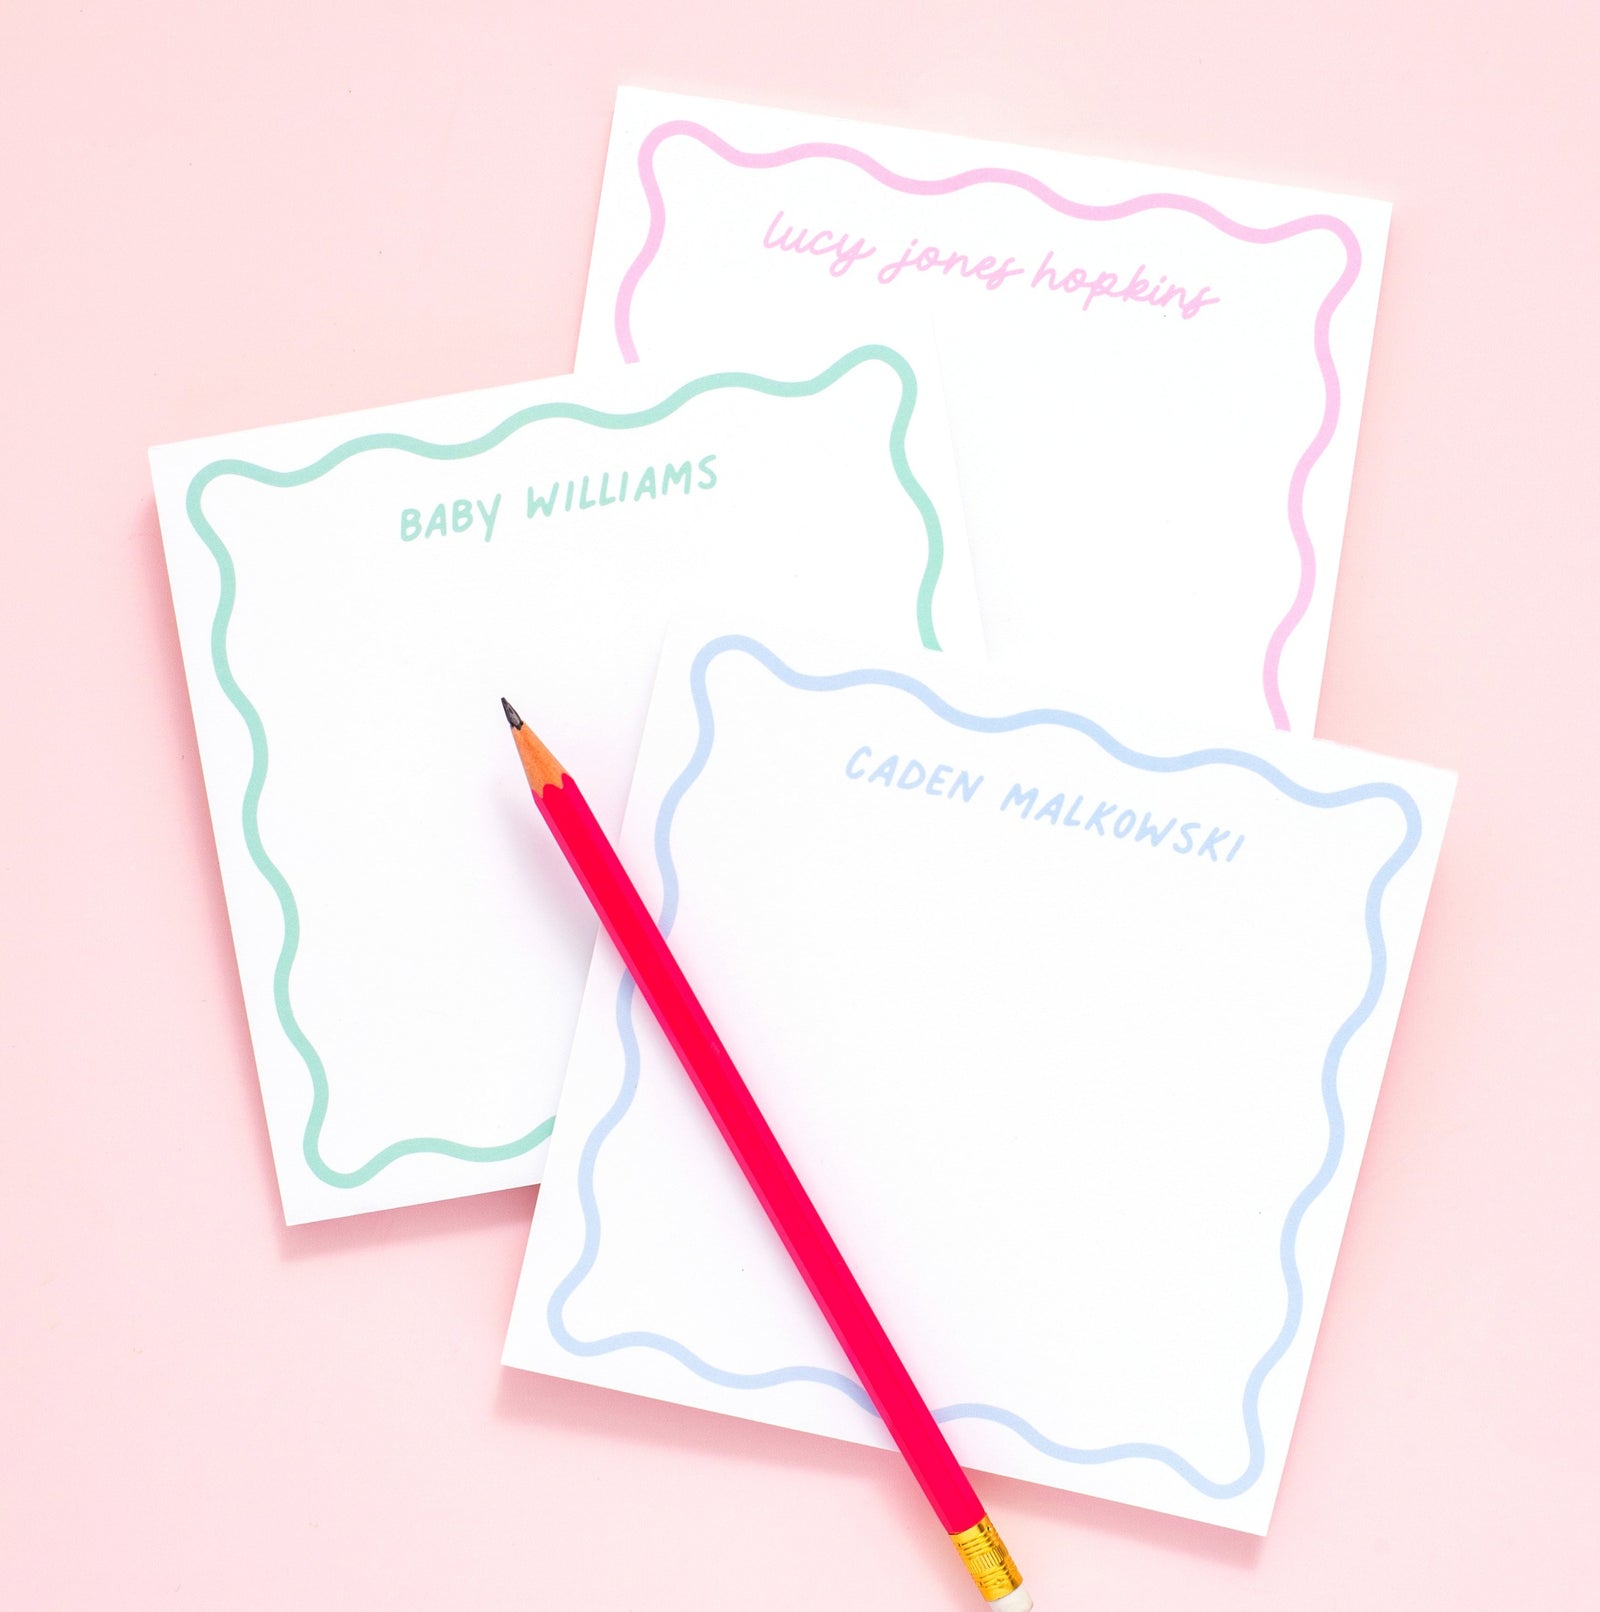 Personalized Lined Kids Stationery Set - Modern Pink Paper